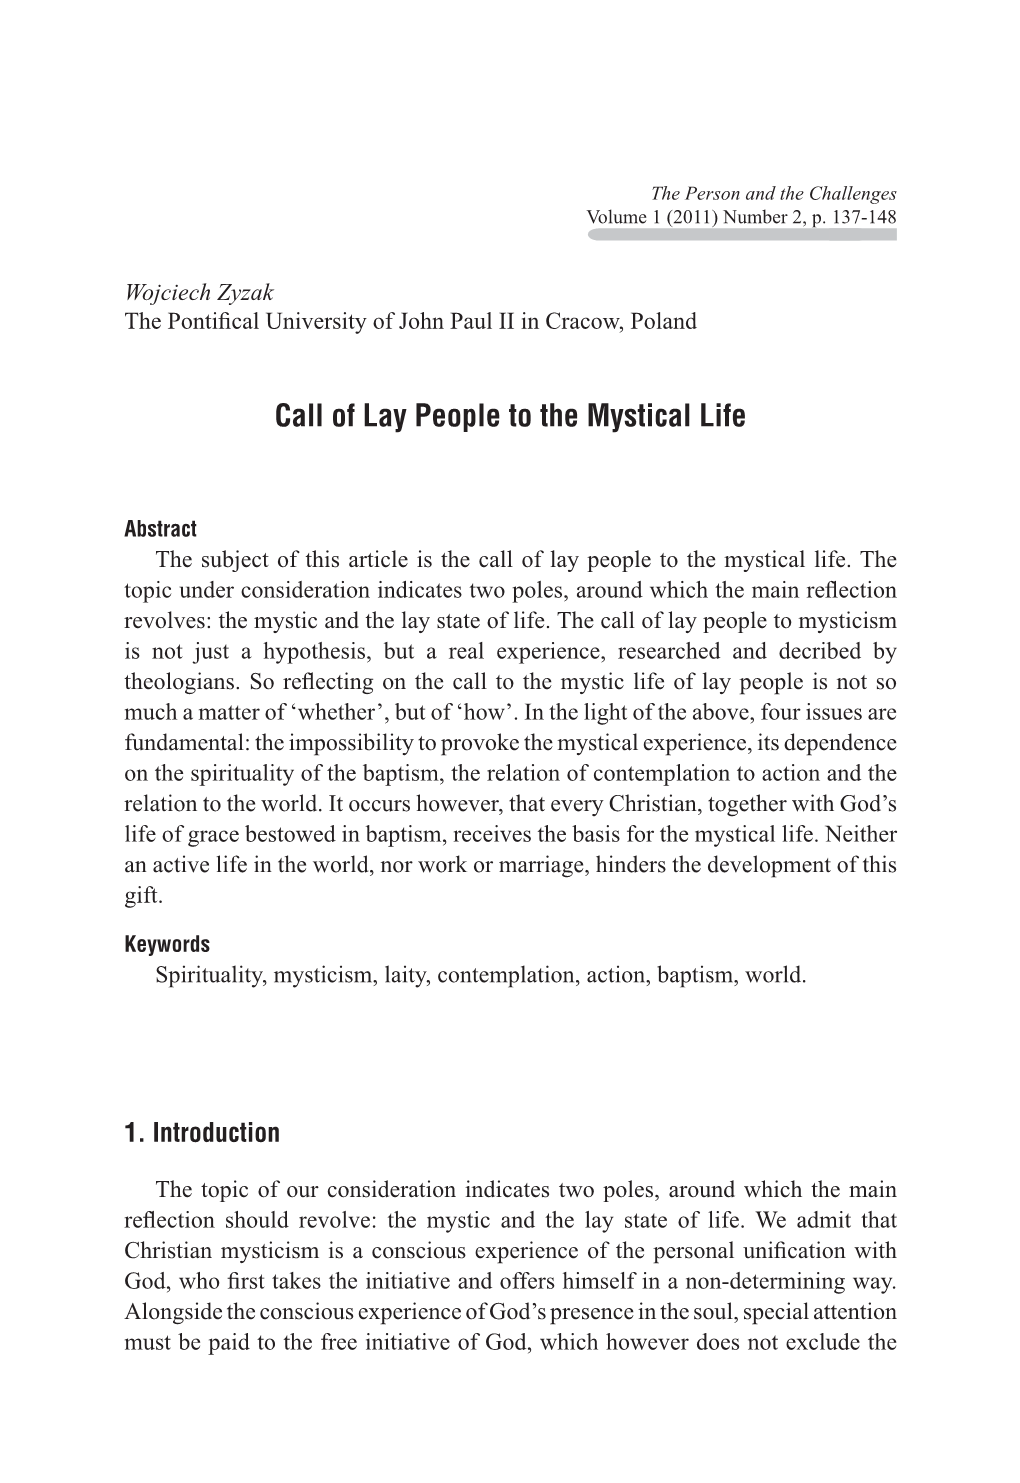 Call of Lay People to the Mystical Life